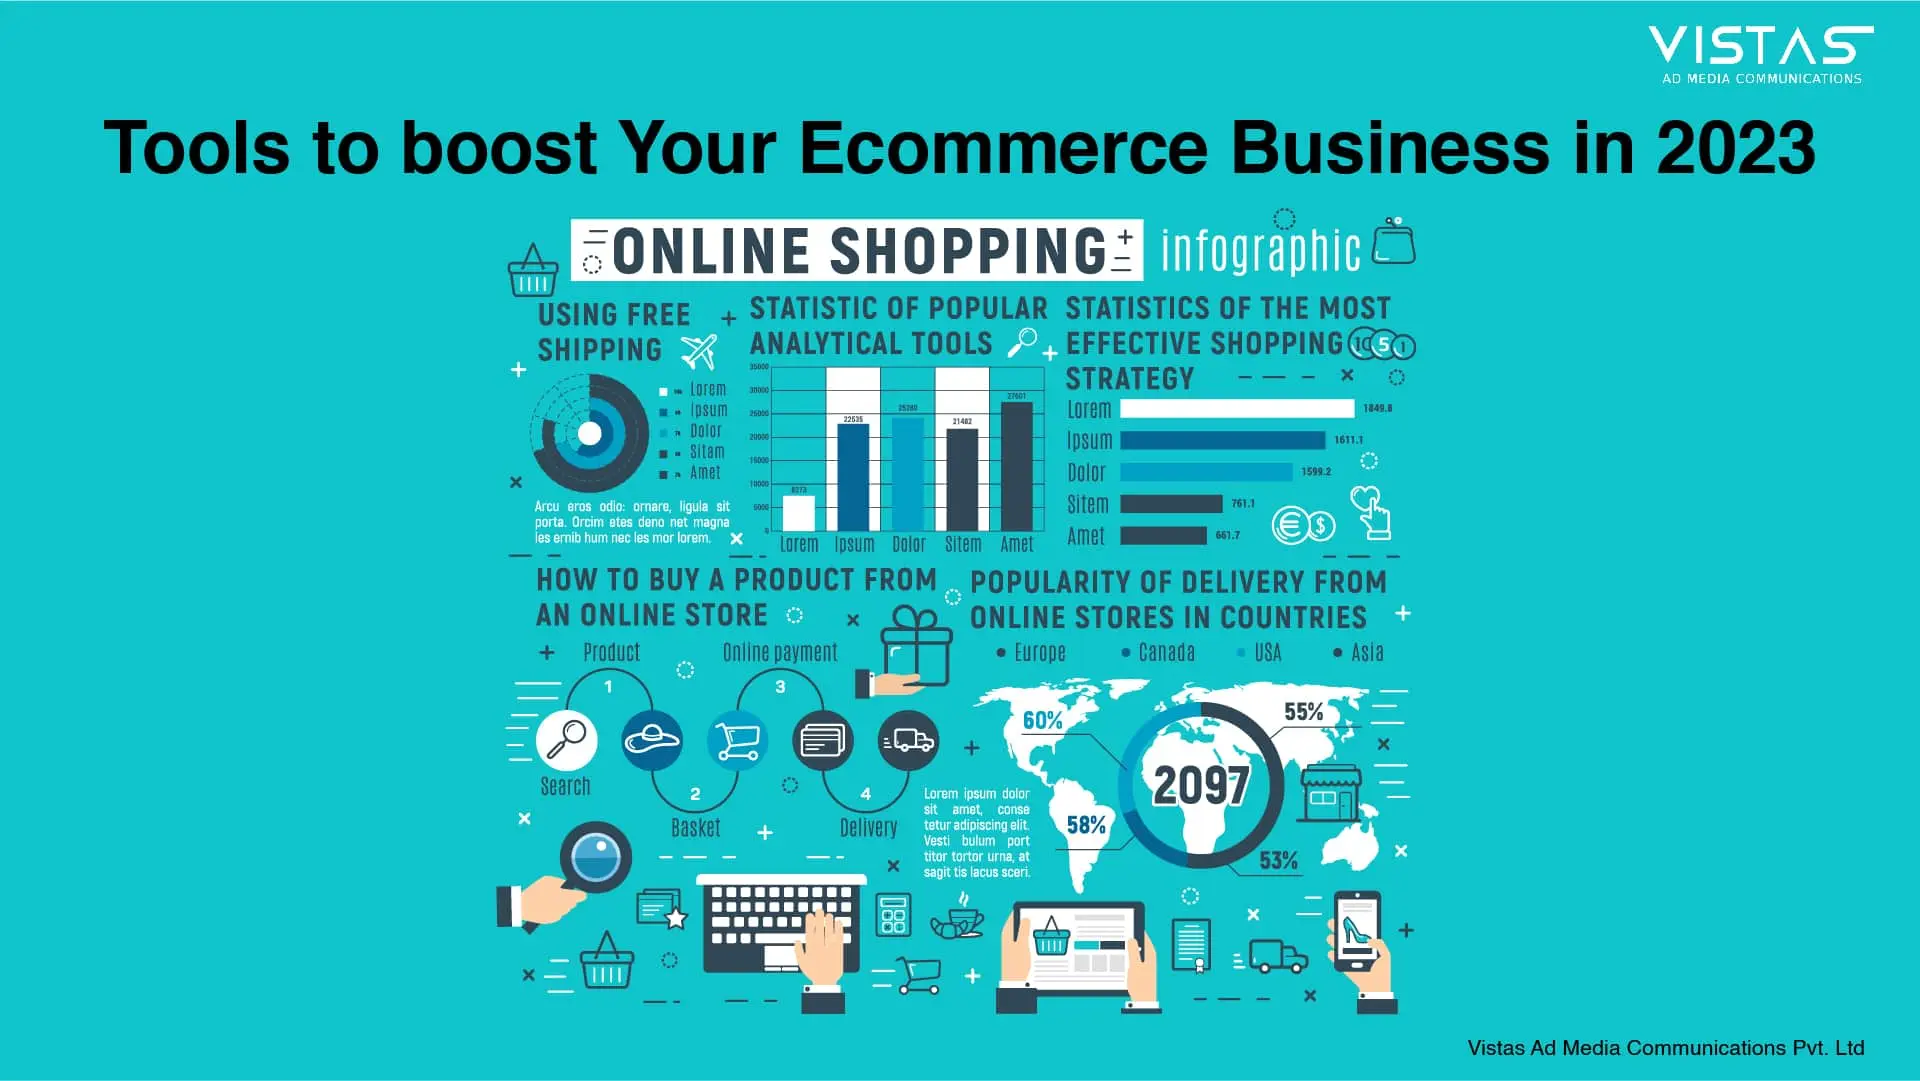 How to Boost eCommerce Business in 2023